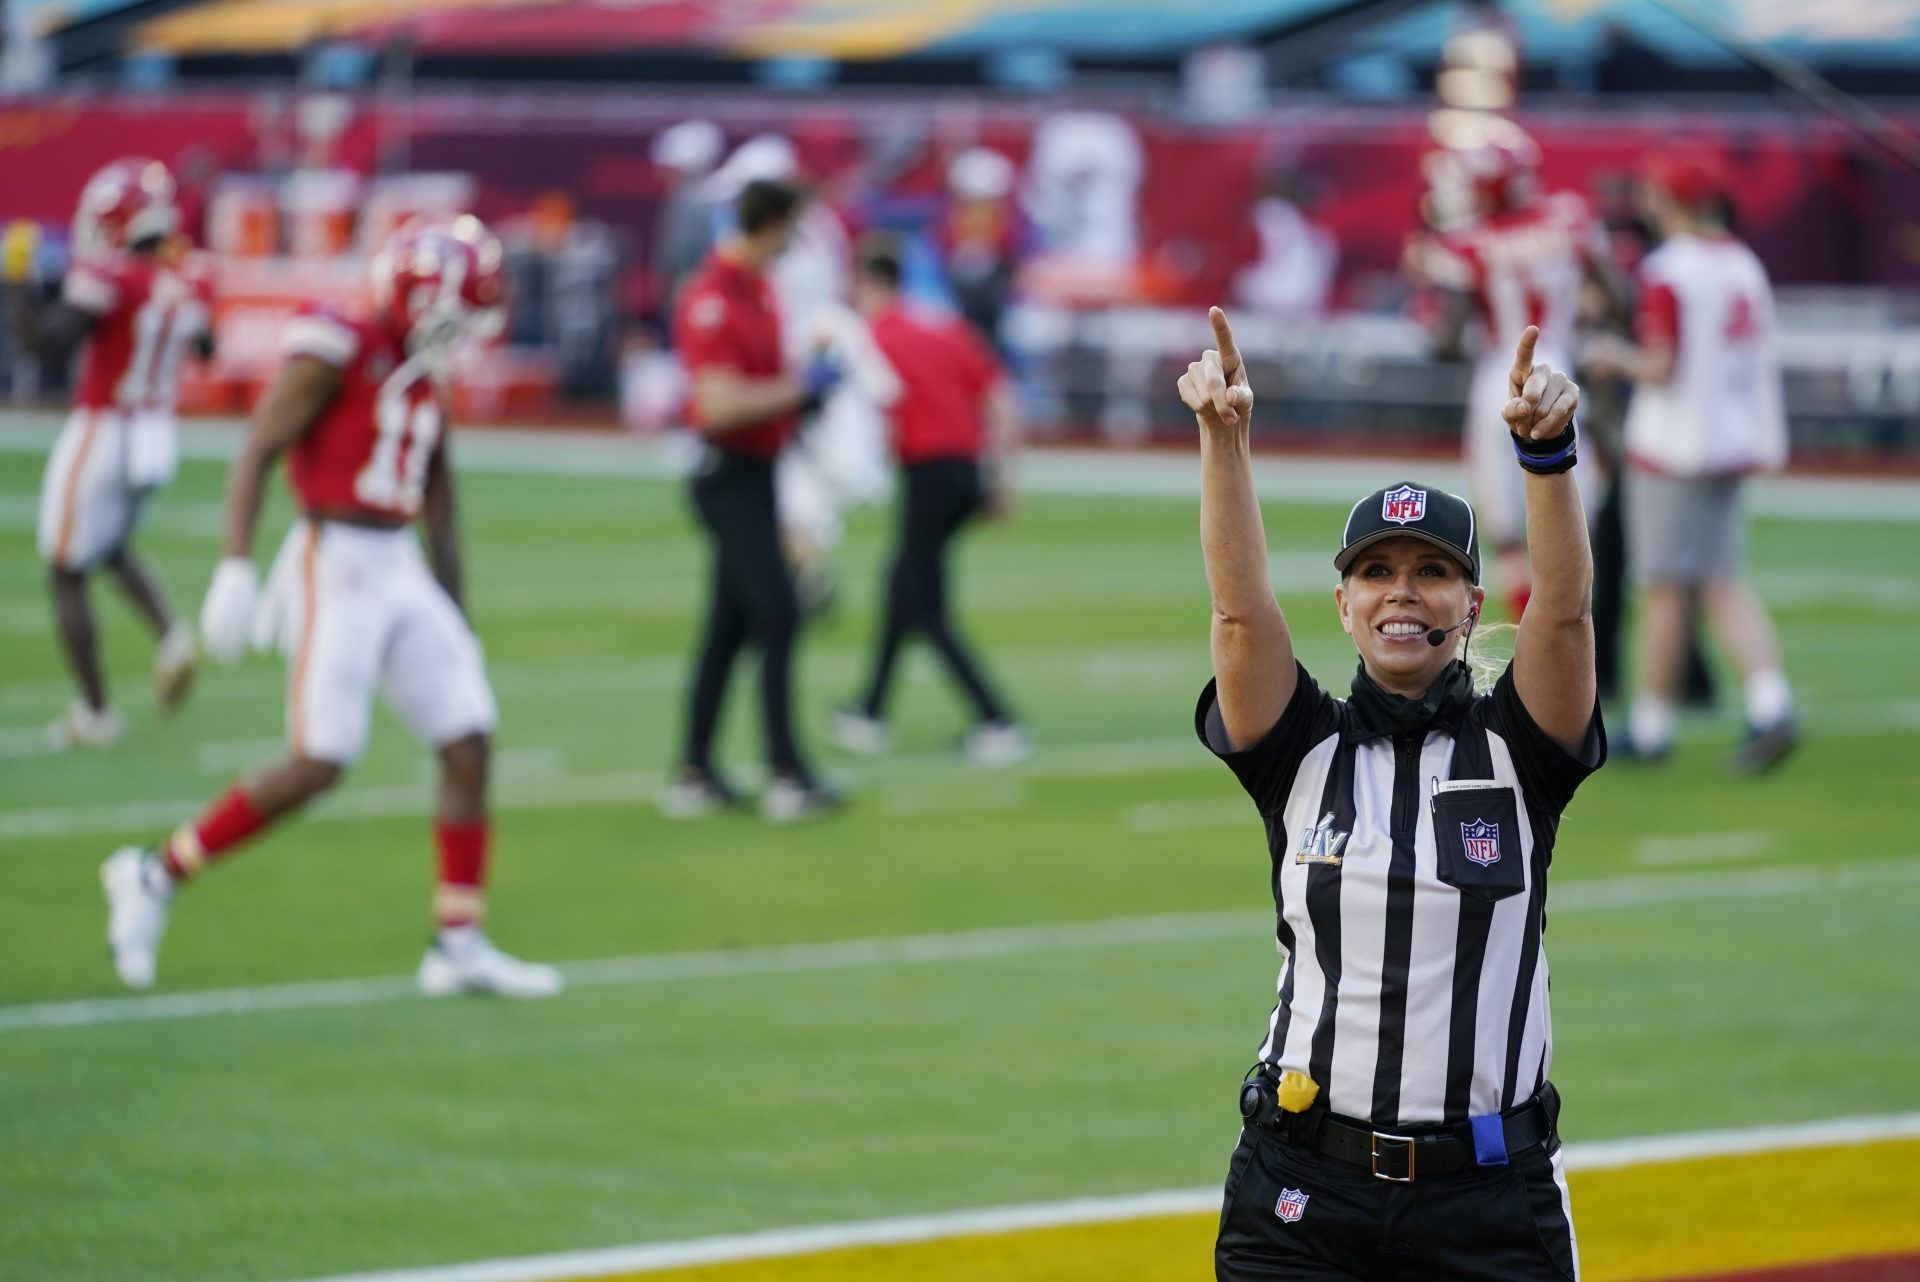 Down judge Sarah Thomas (53) arrives before the NFL Super Bowl 55 football game between the Kansas City Chiefs and Tampa Bay Buccaneers, Sunday, Feb. 7, 2021, in Tampa, Fla.